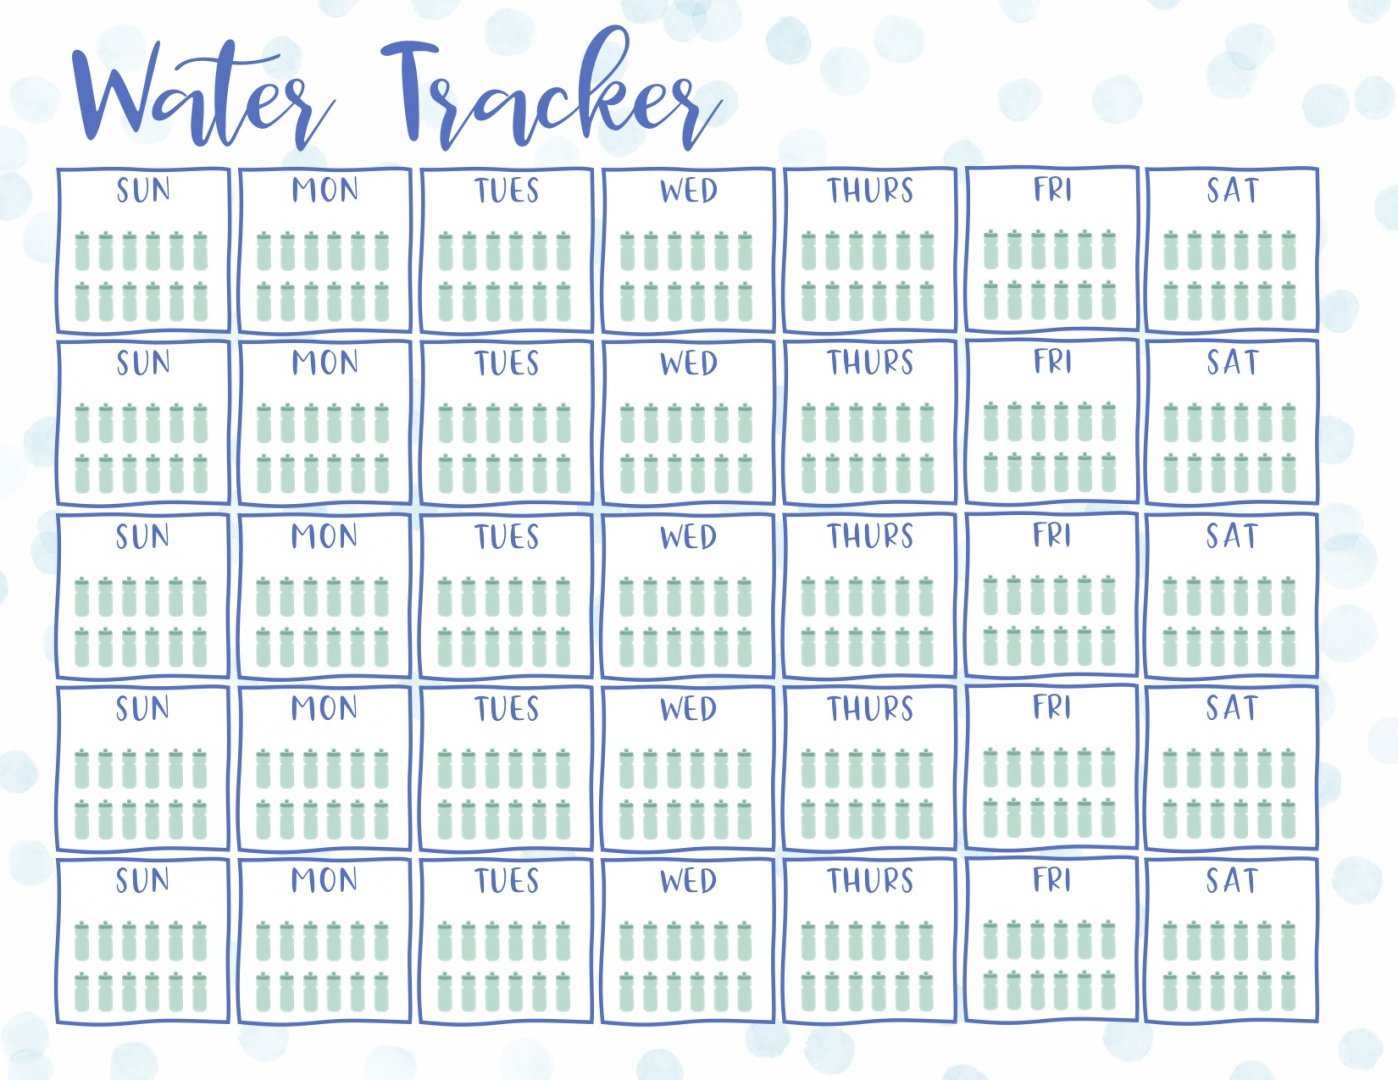 Daily Habit Tracker for Drinking Water